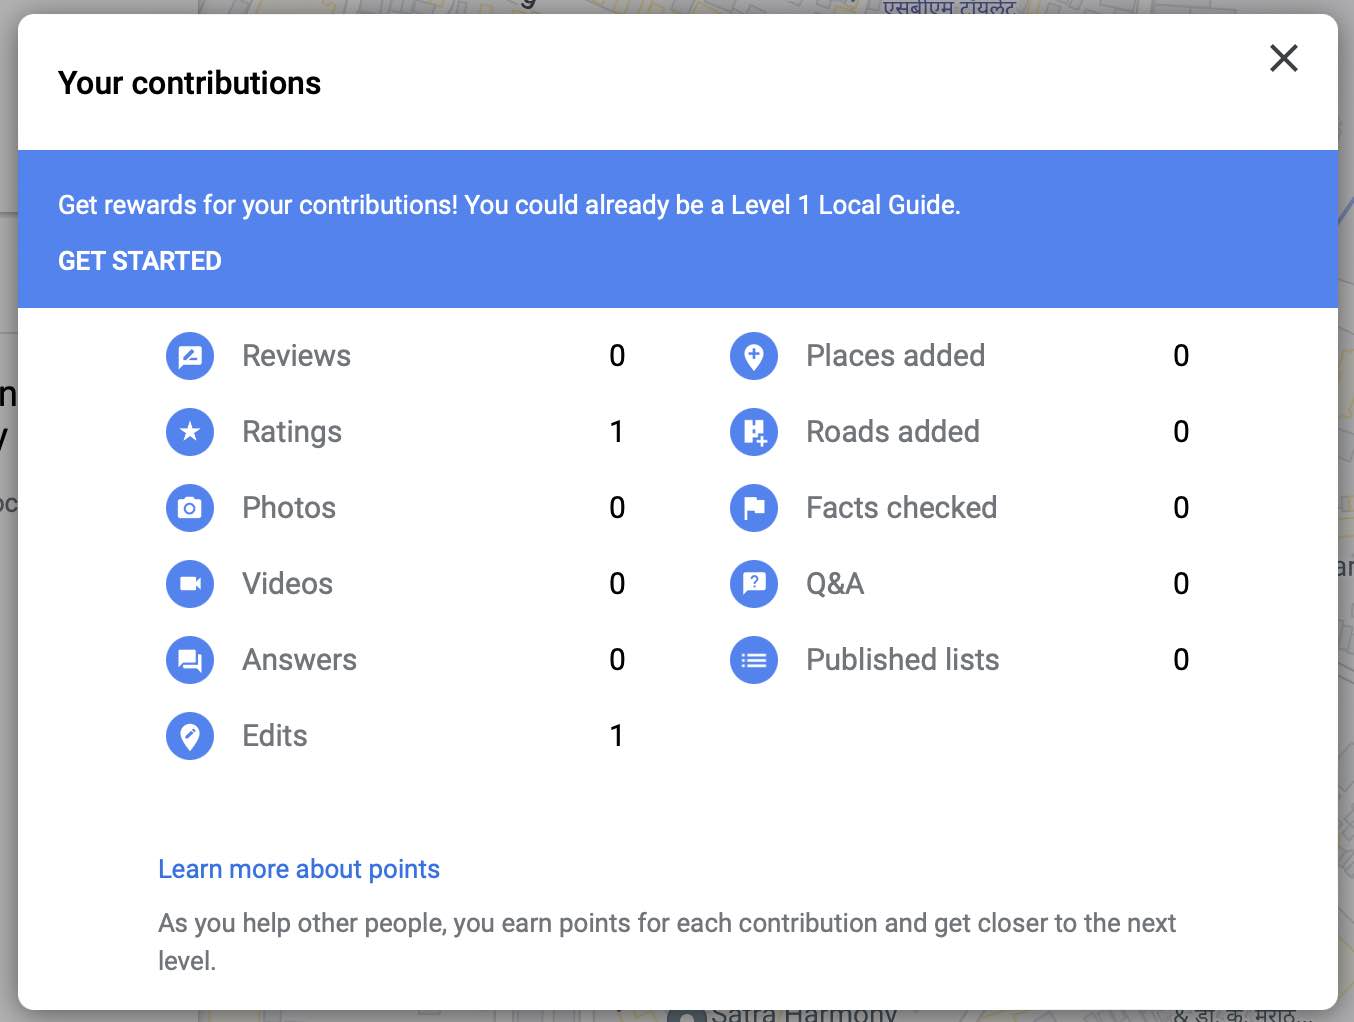 Your contributions details Google Local Guides